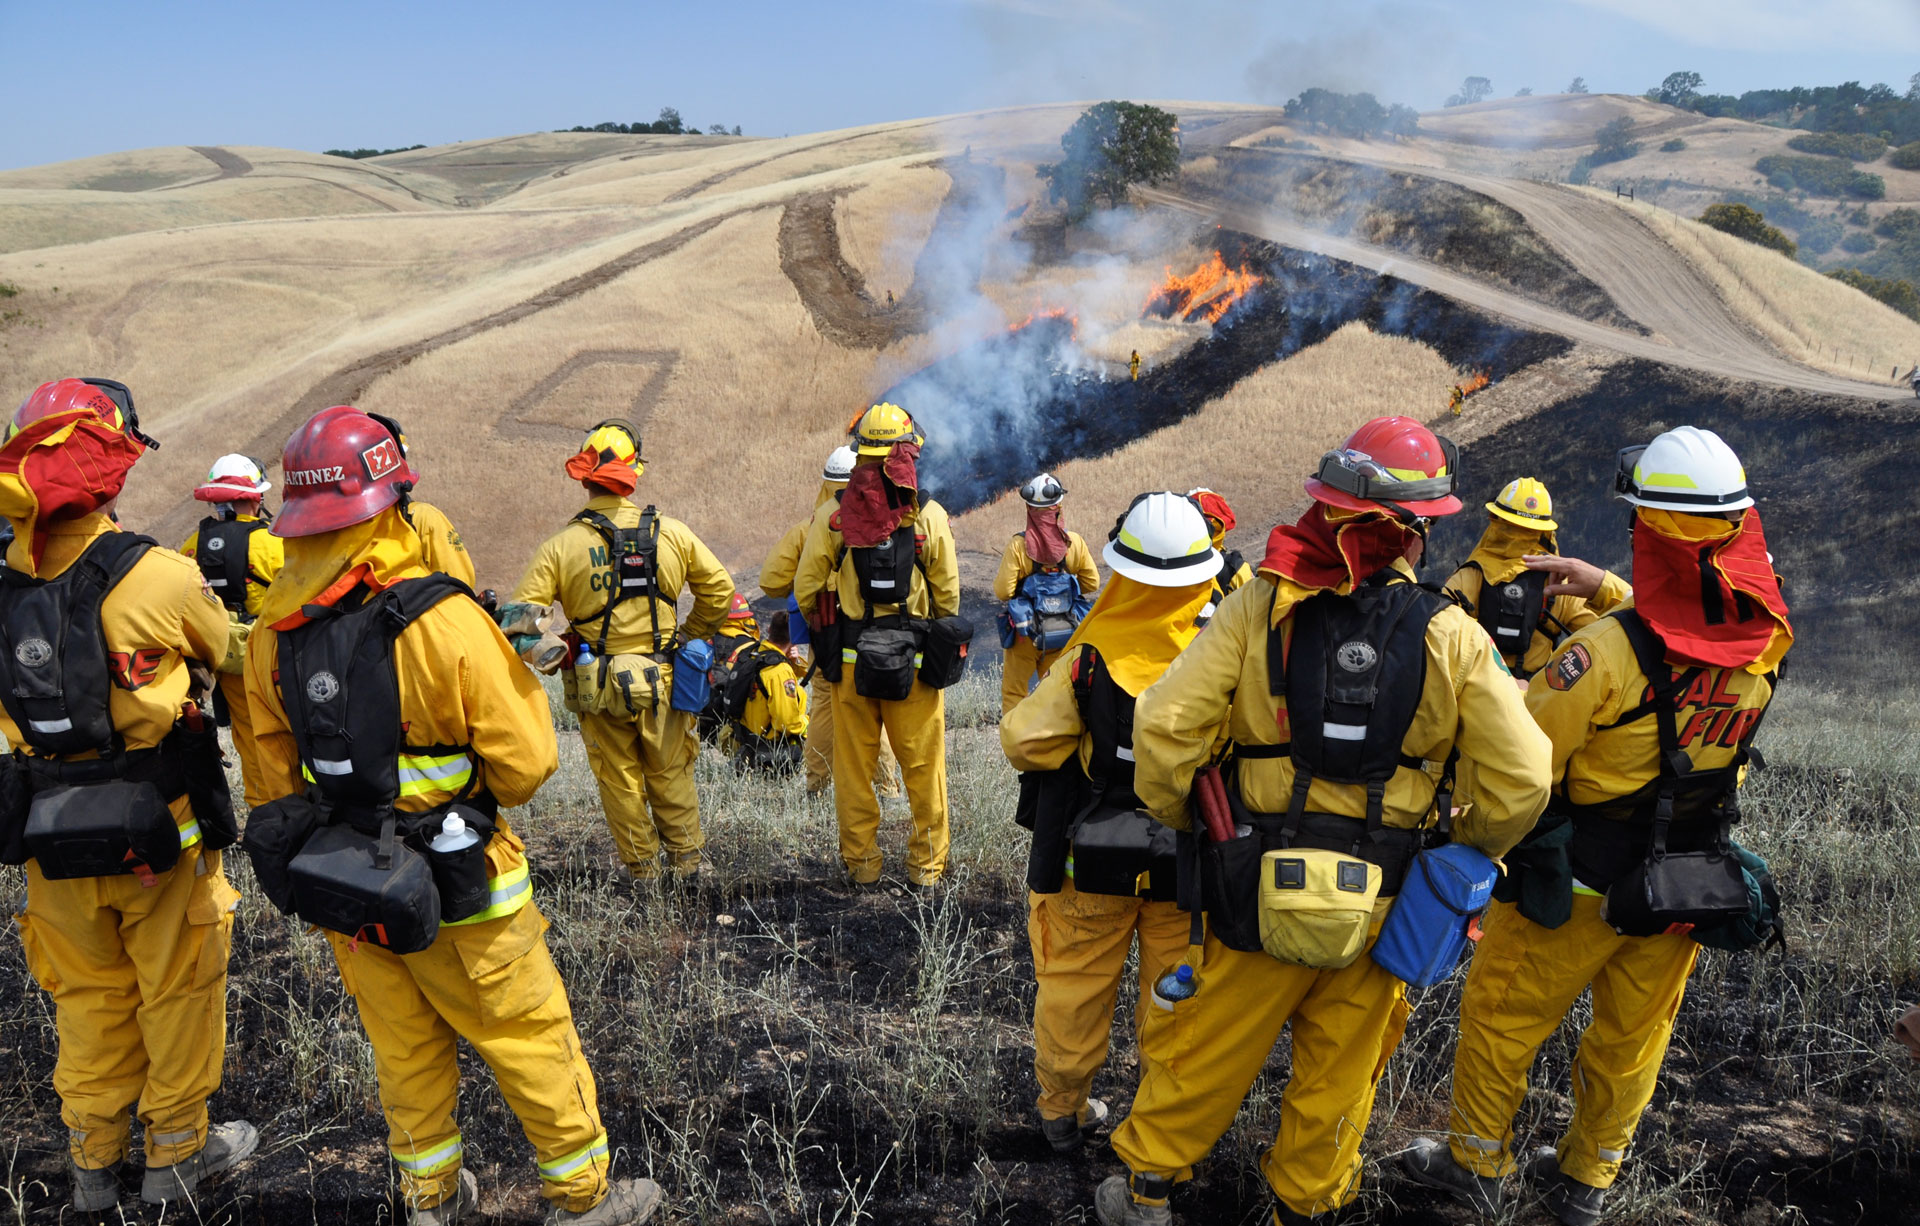 New vehicles introduced to the frontline in the fight against wildfires